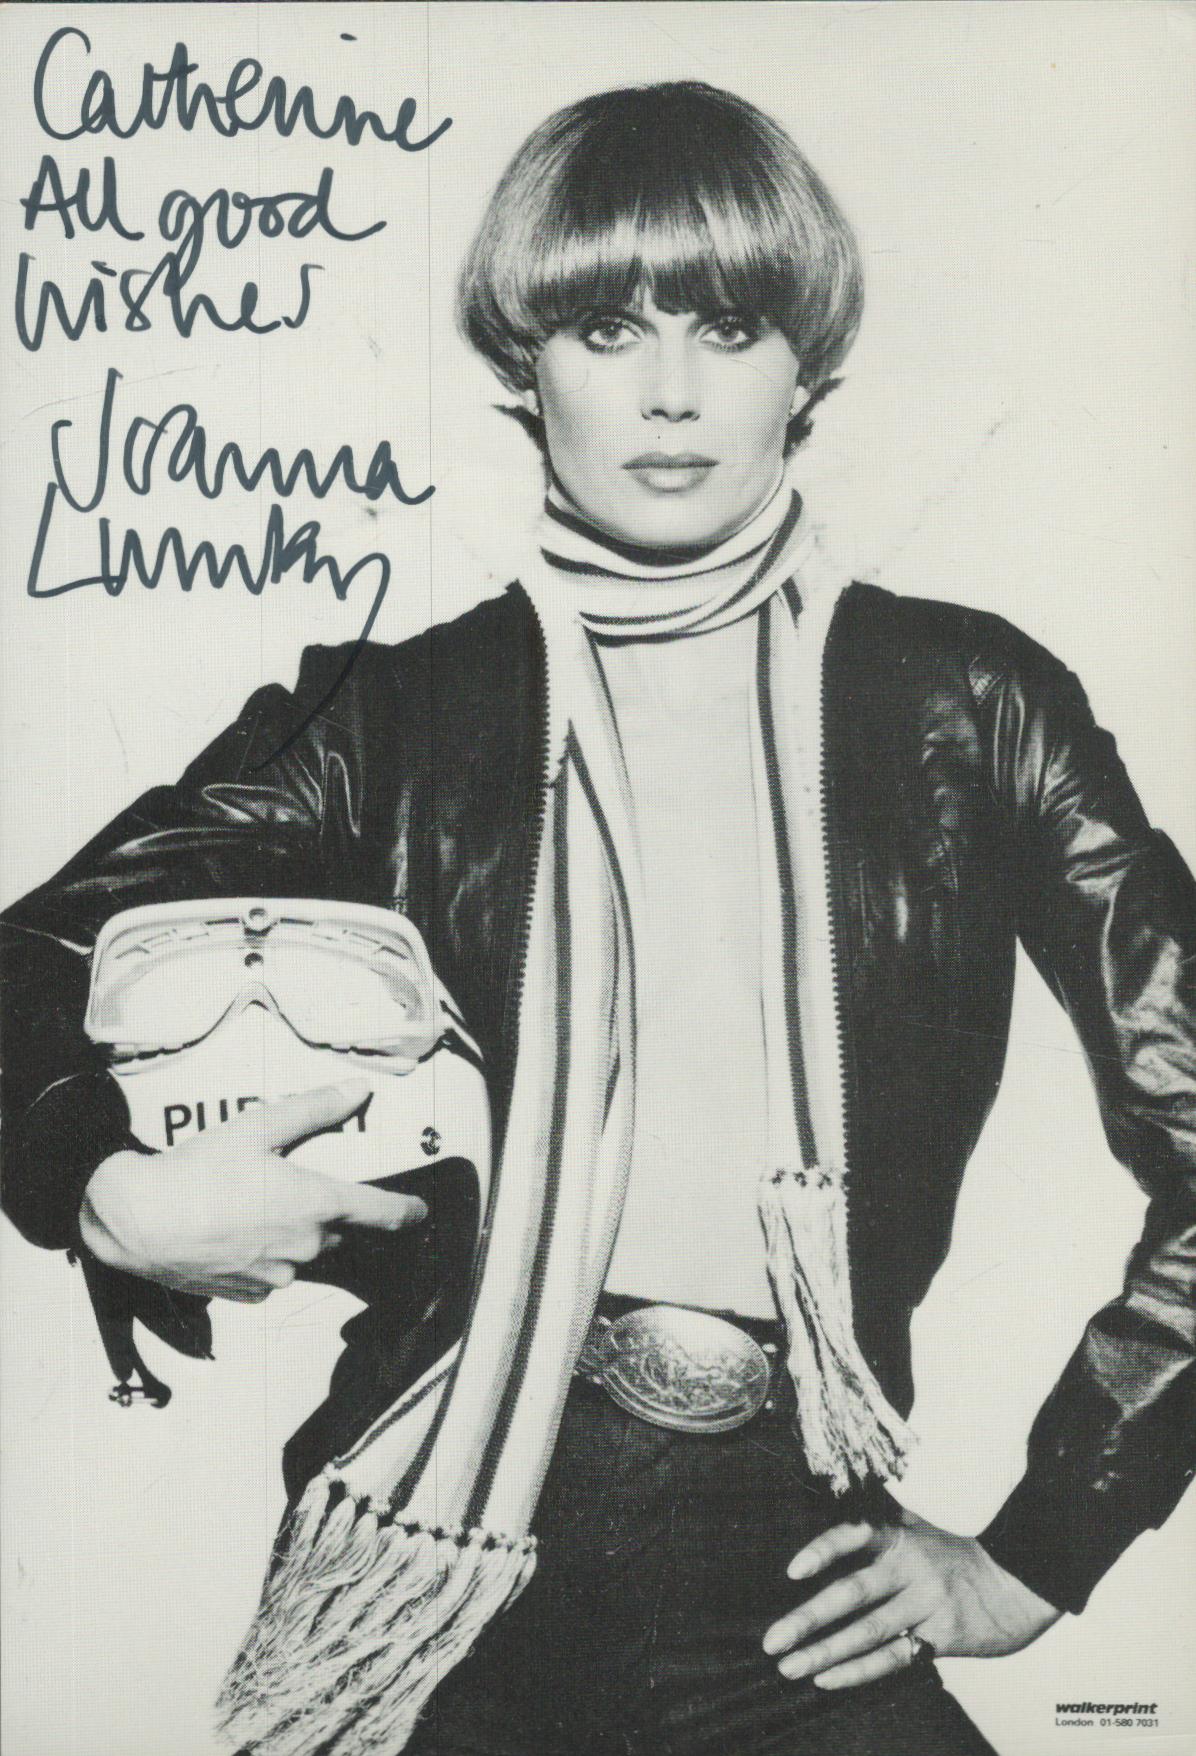 Joanna Lumley signed 6x4 inch vintage black and white photo. Dedicated. Good Condition. All